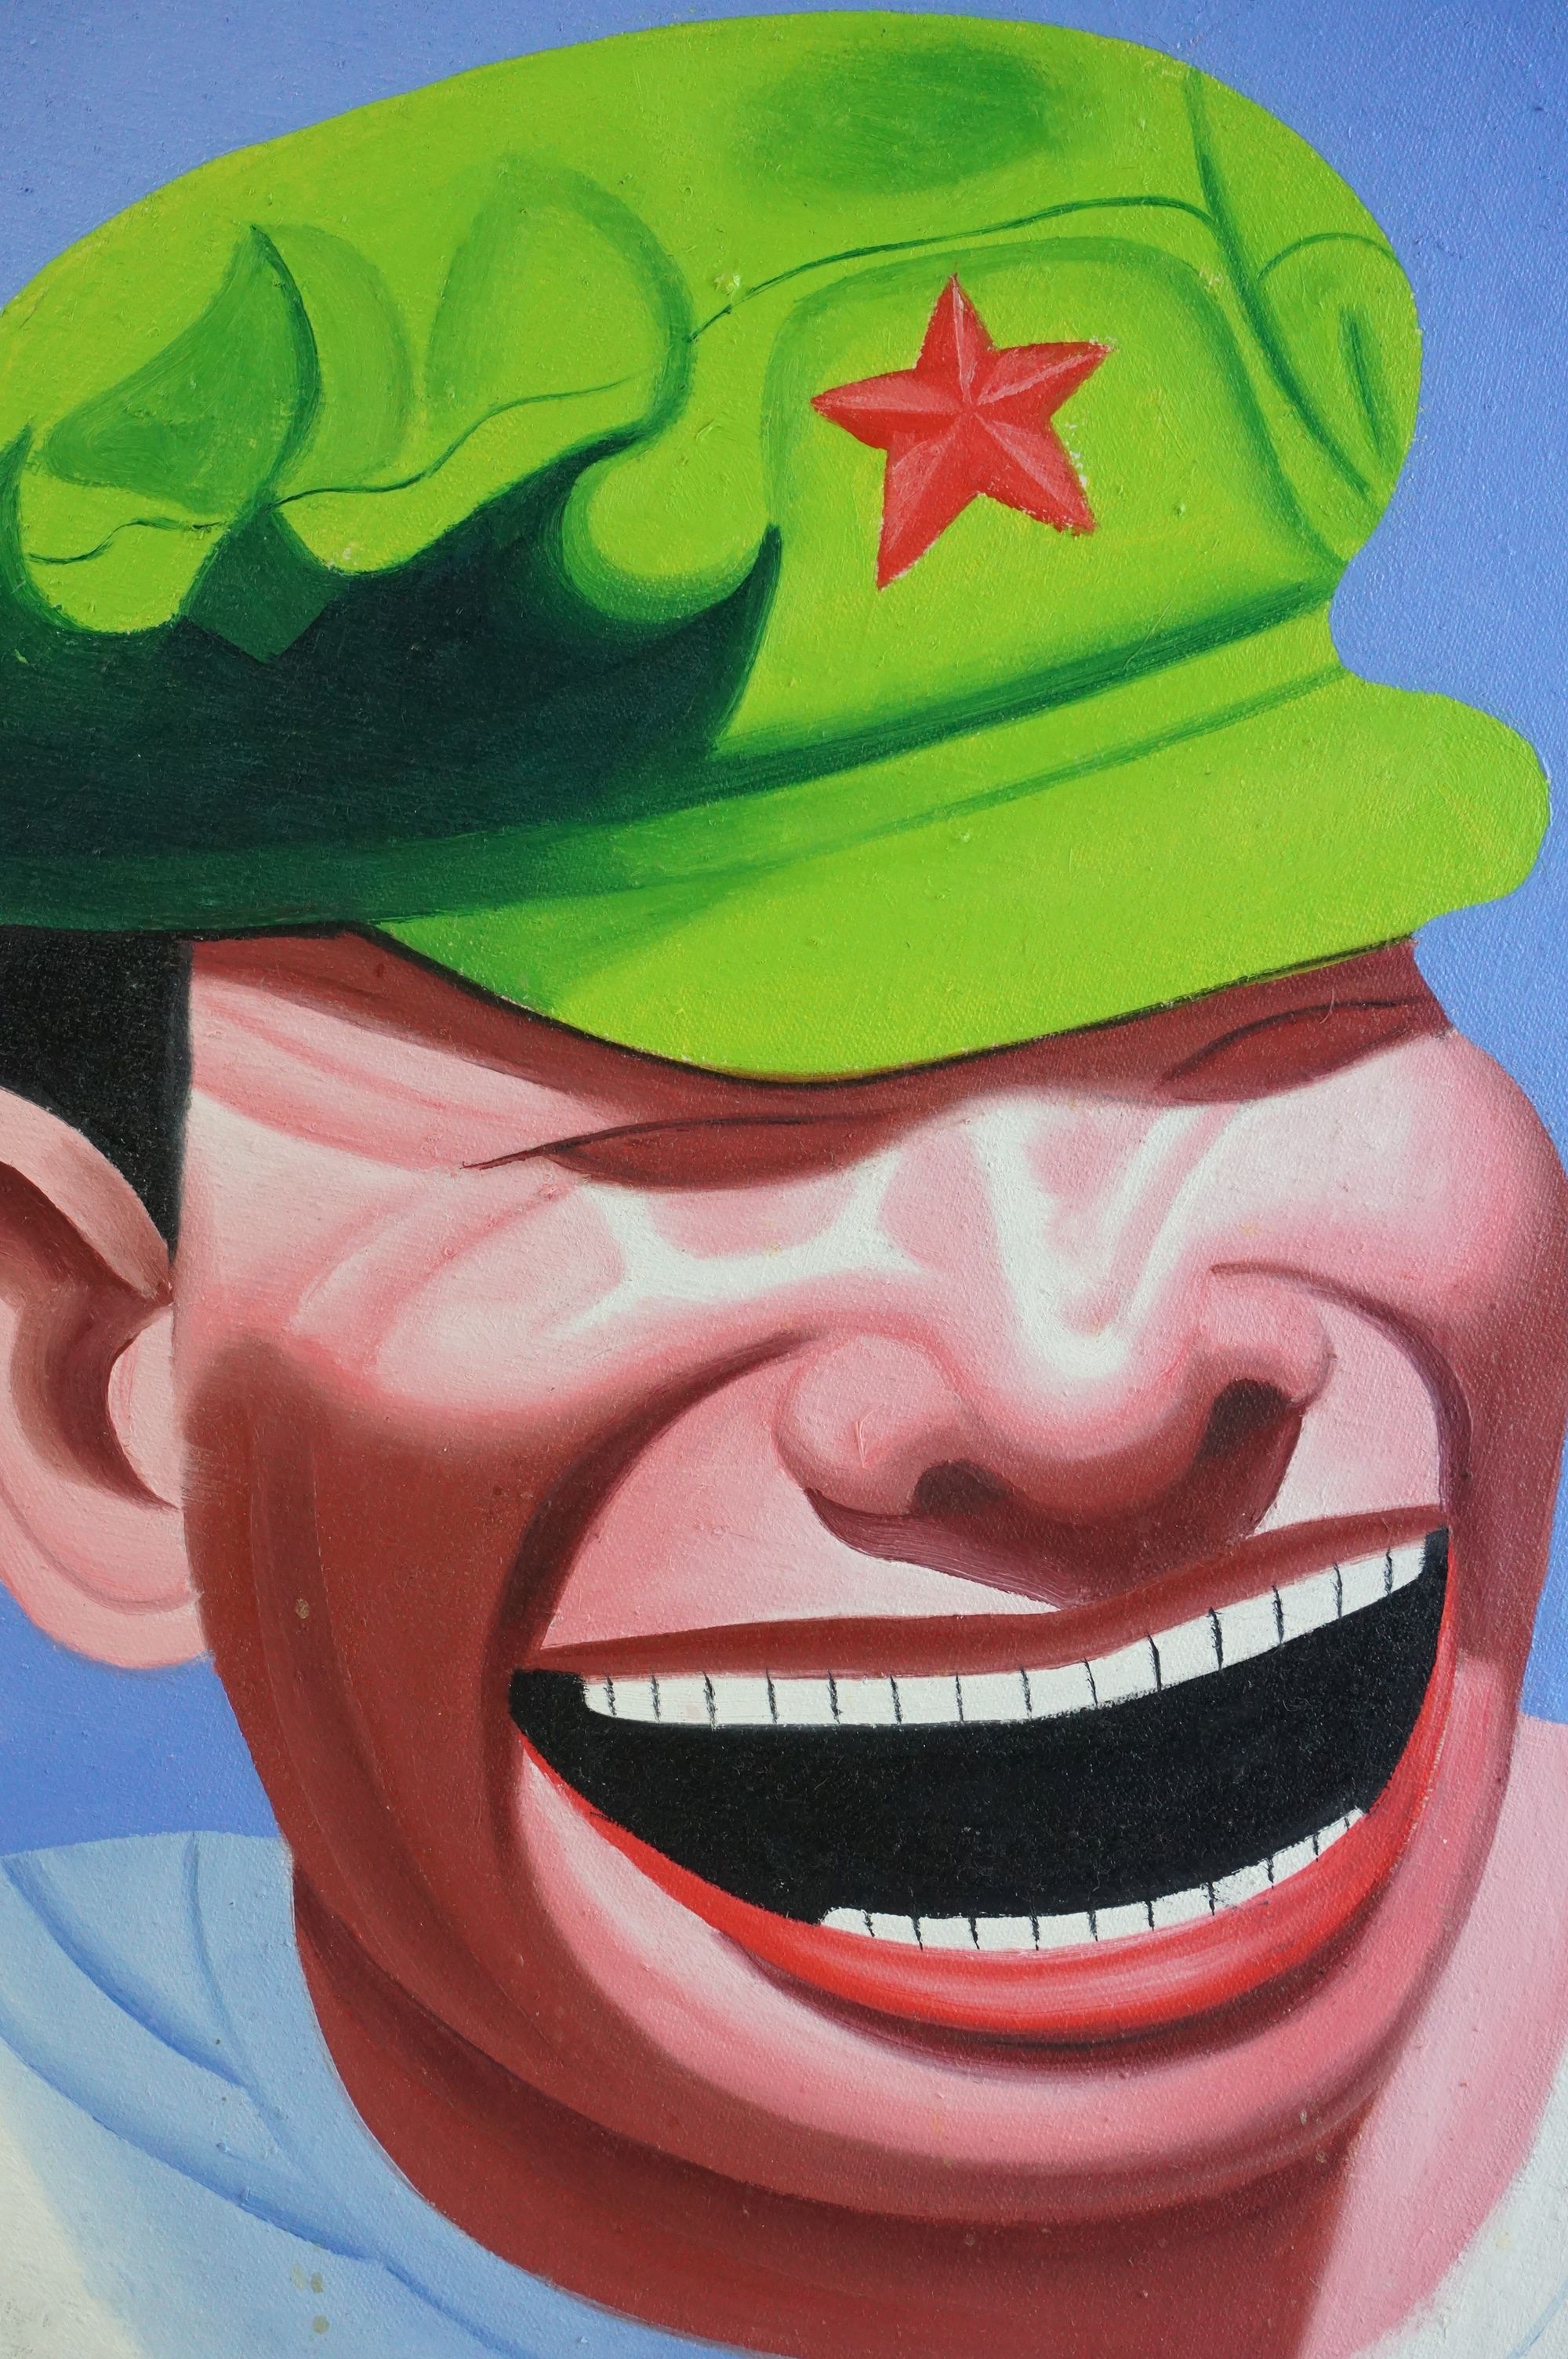 Contemporary Oil Painting on Canvas of a Laughing Chinese Man, 35.5cms x 30cms, unframed - Image 3 of 3